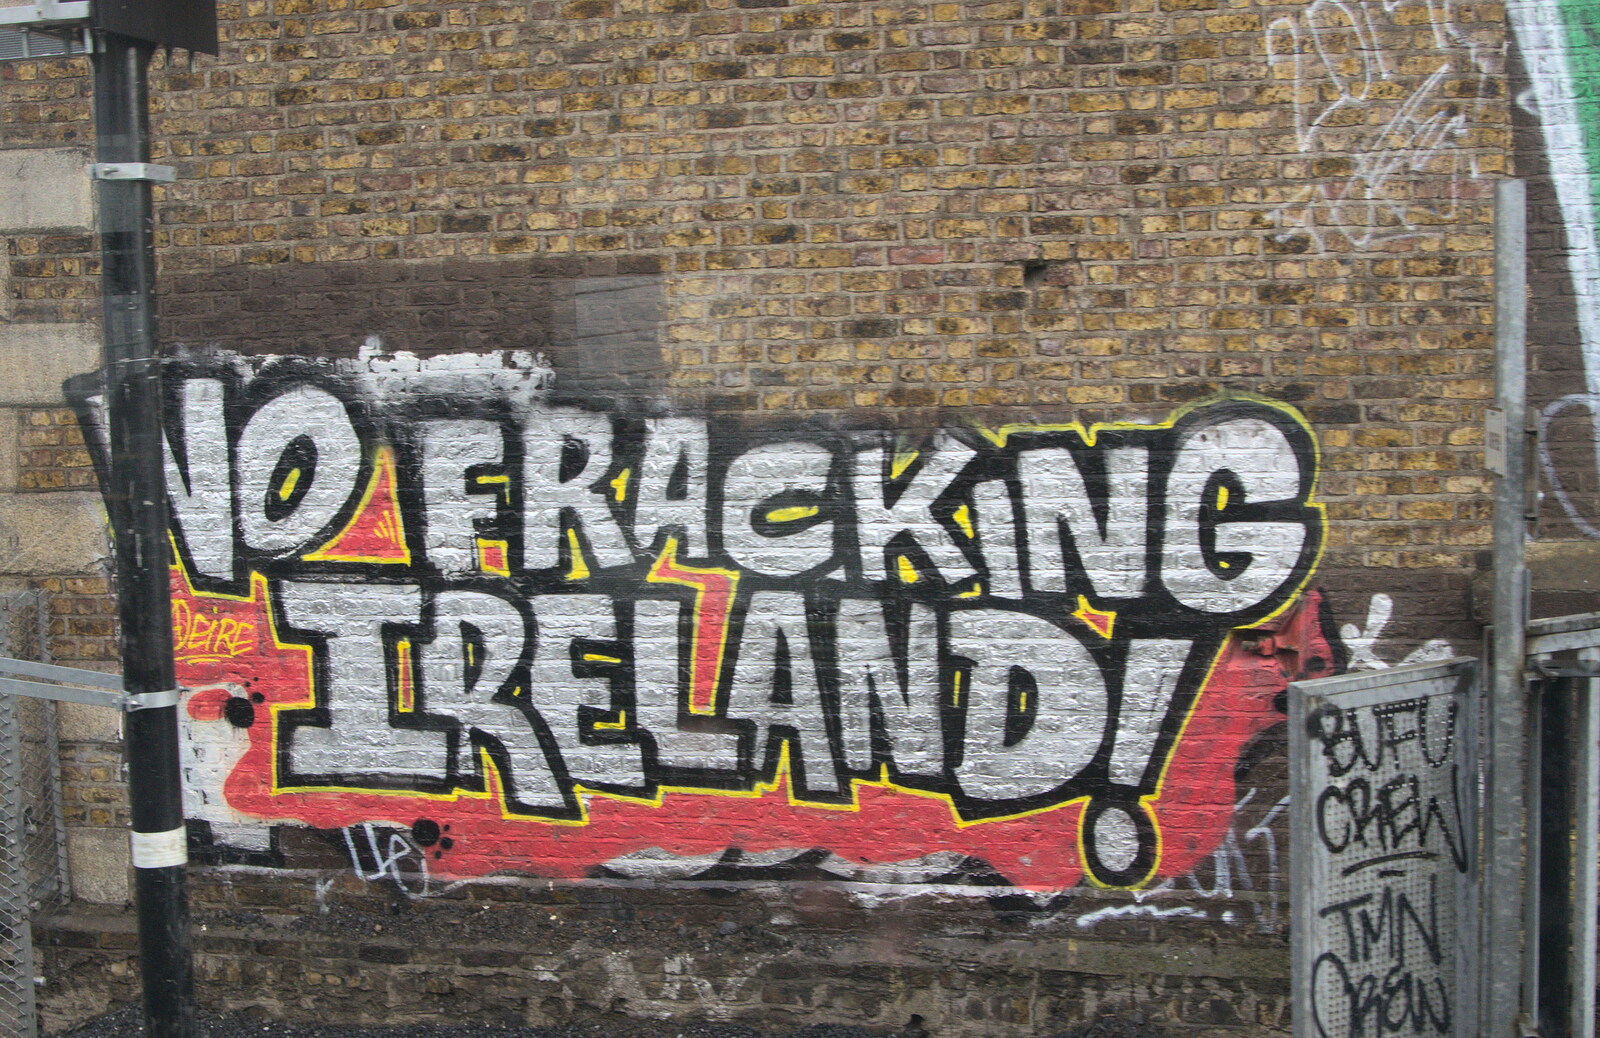 Anti-Fracking political statement from Christmas Eve in Dublin and Blackrock, Ireland - 24th December 2015